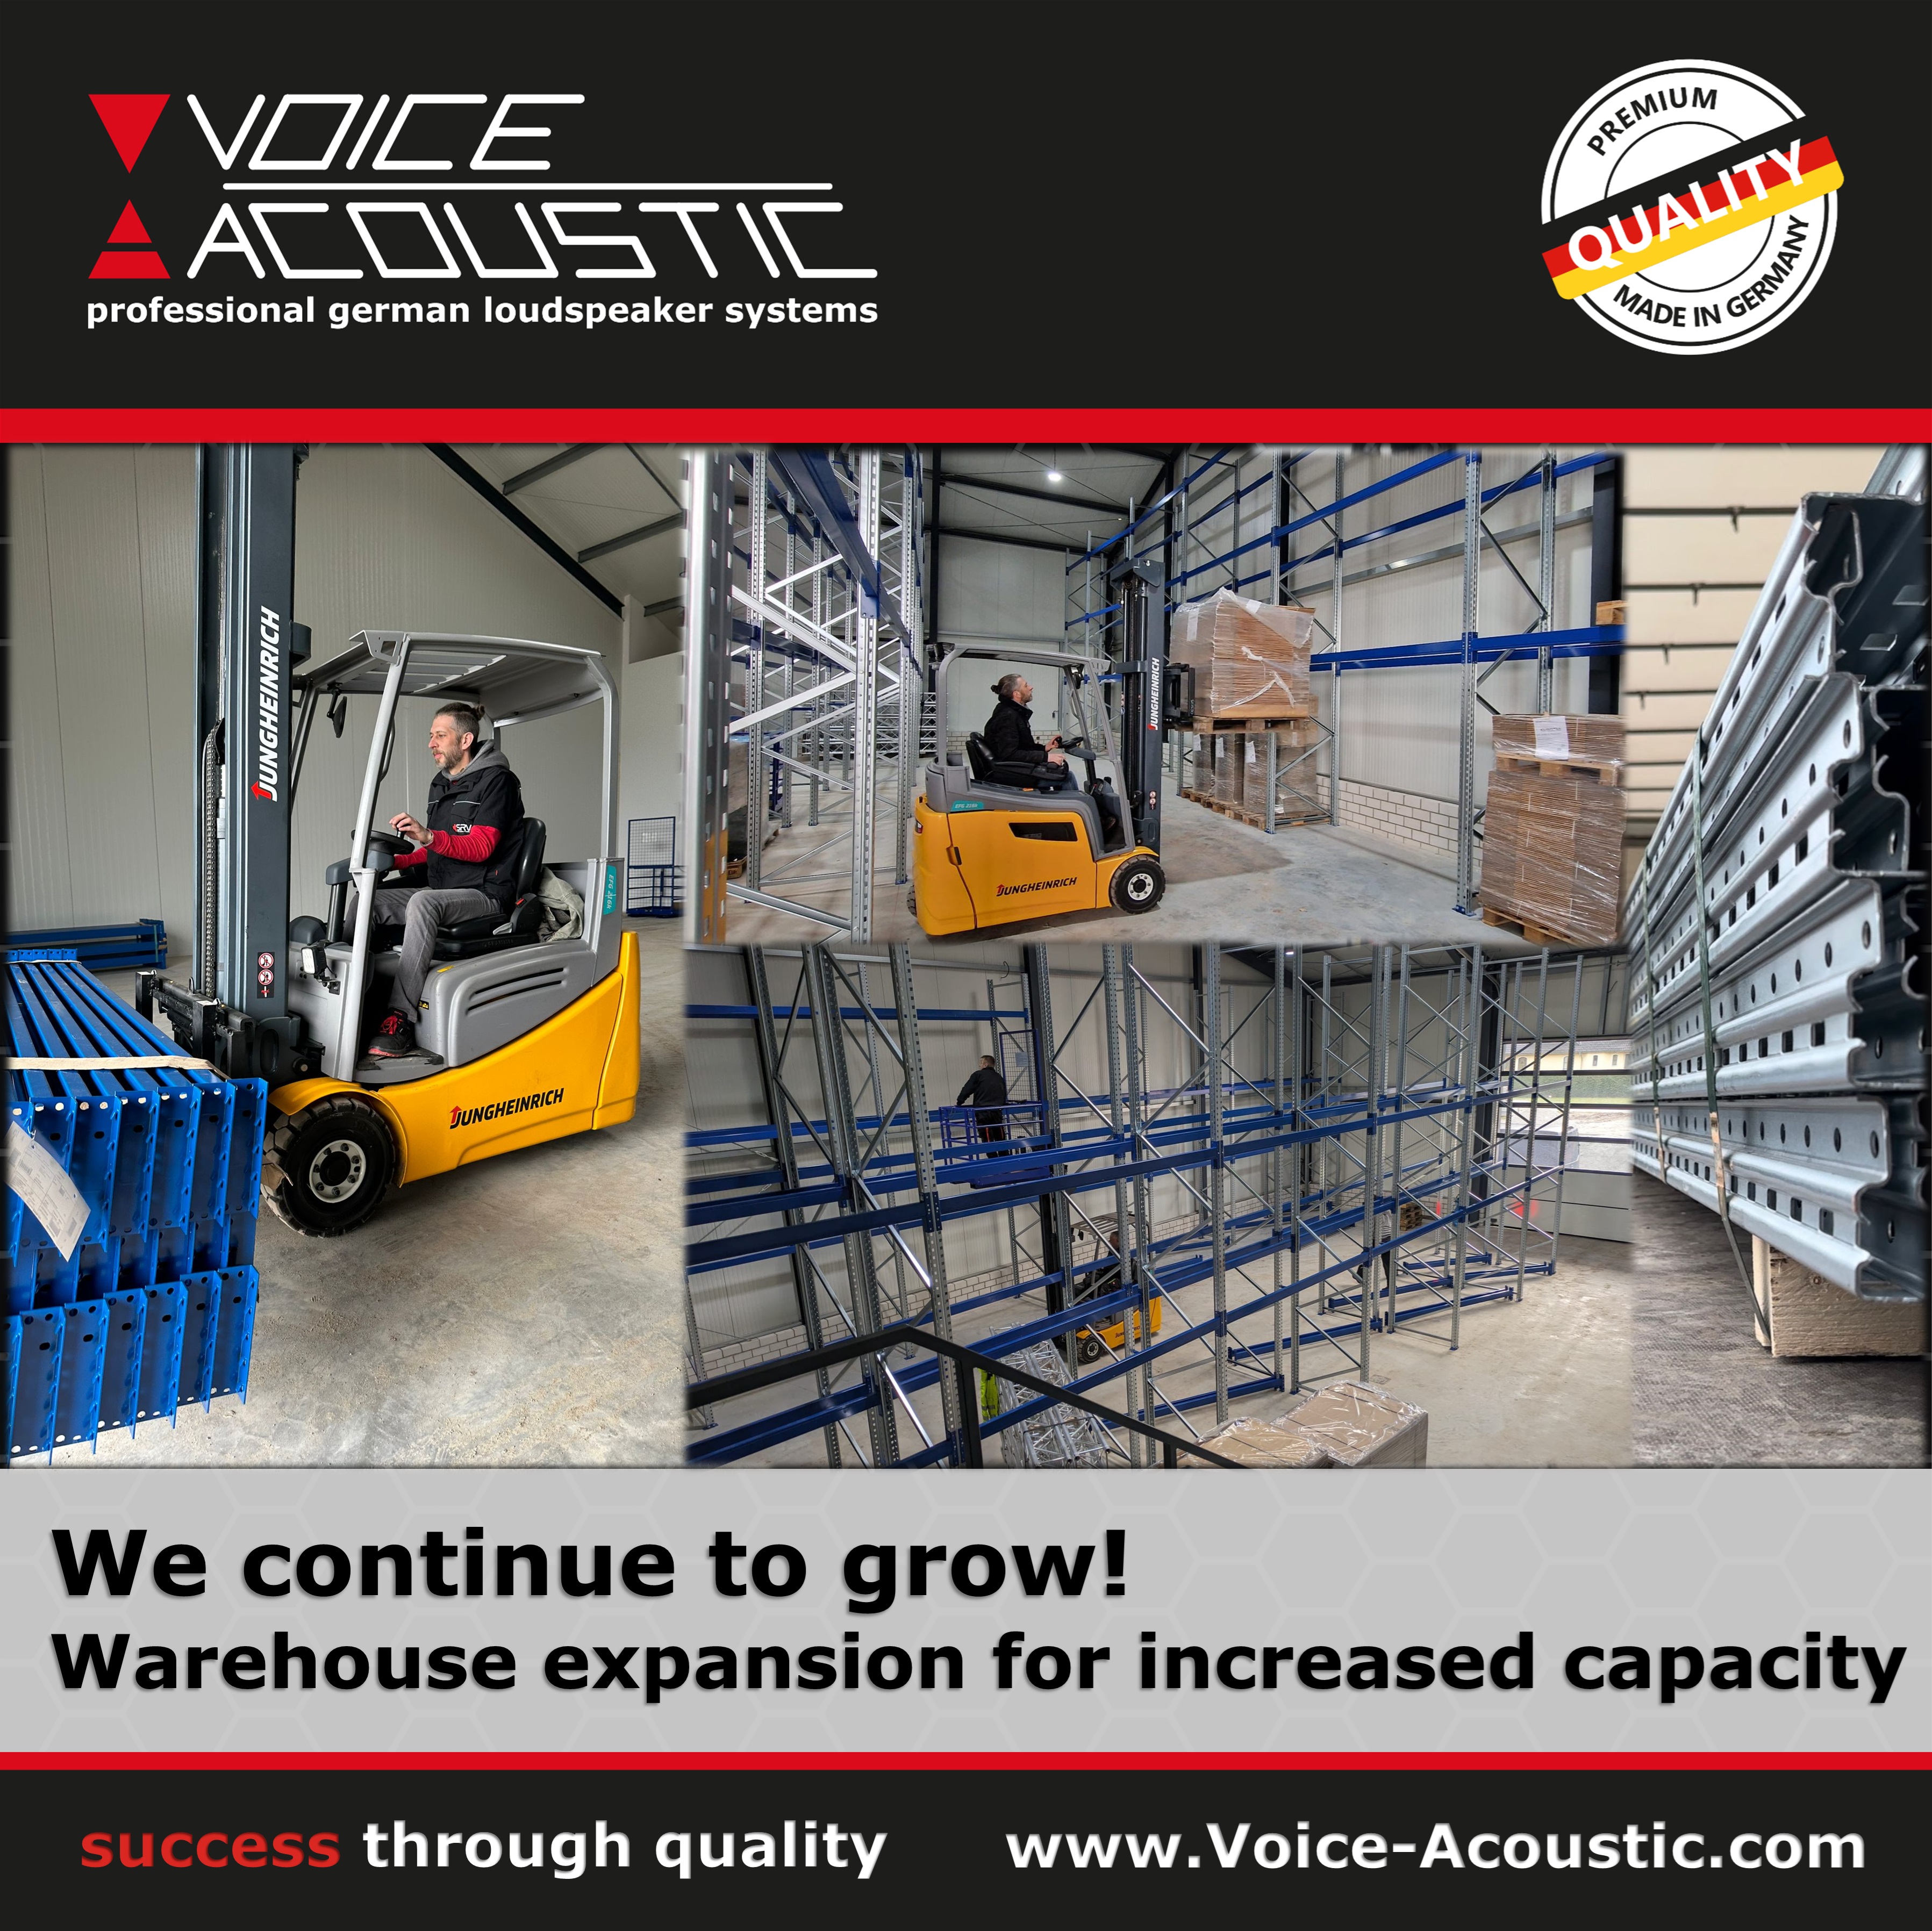 We continue to grow - Warehouse expansion